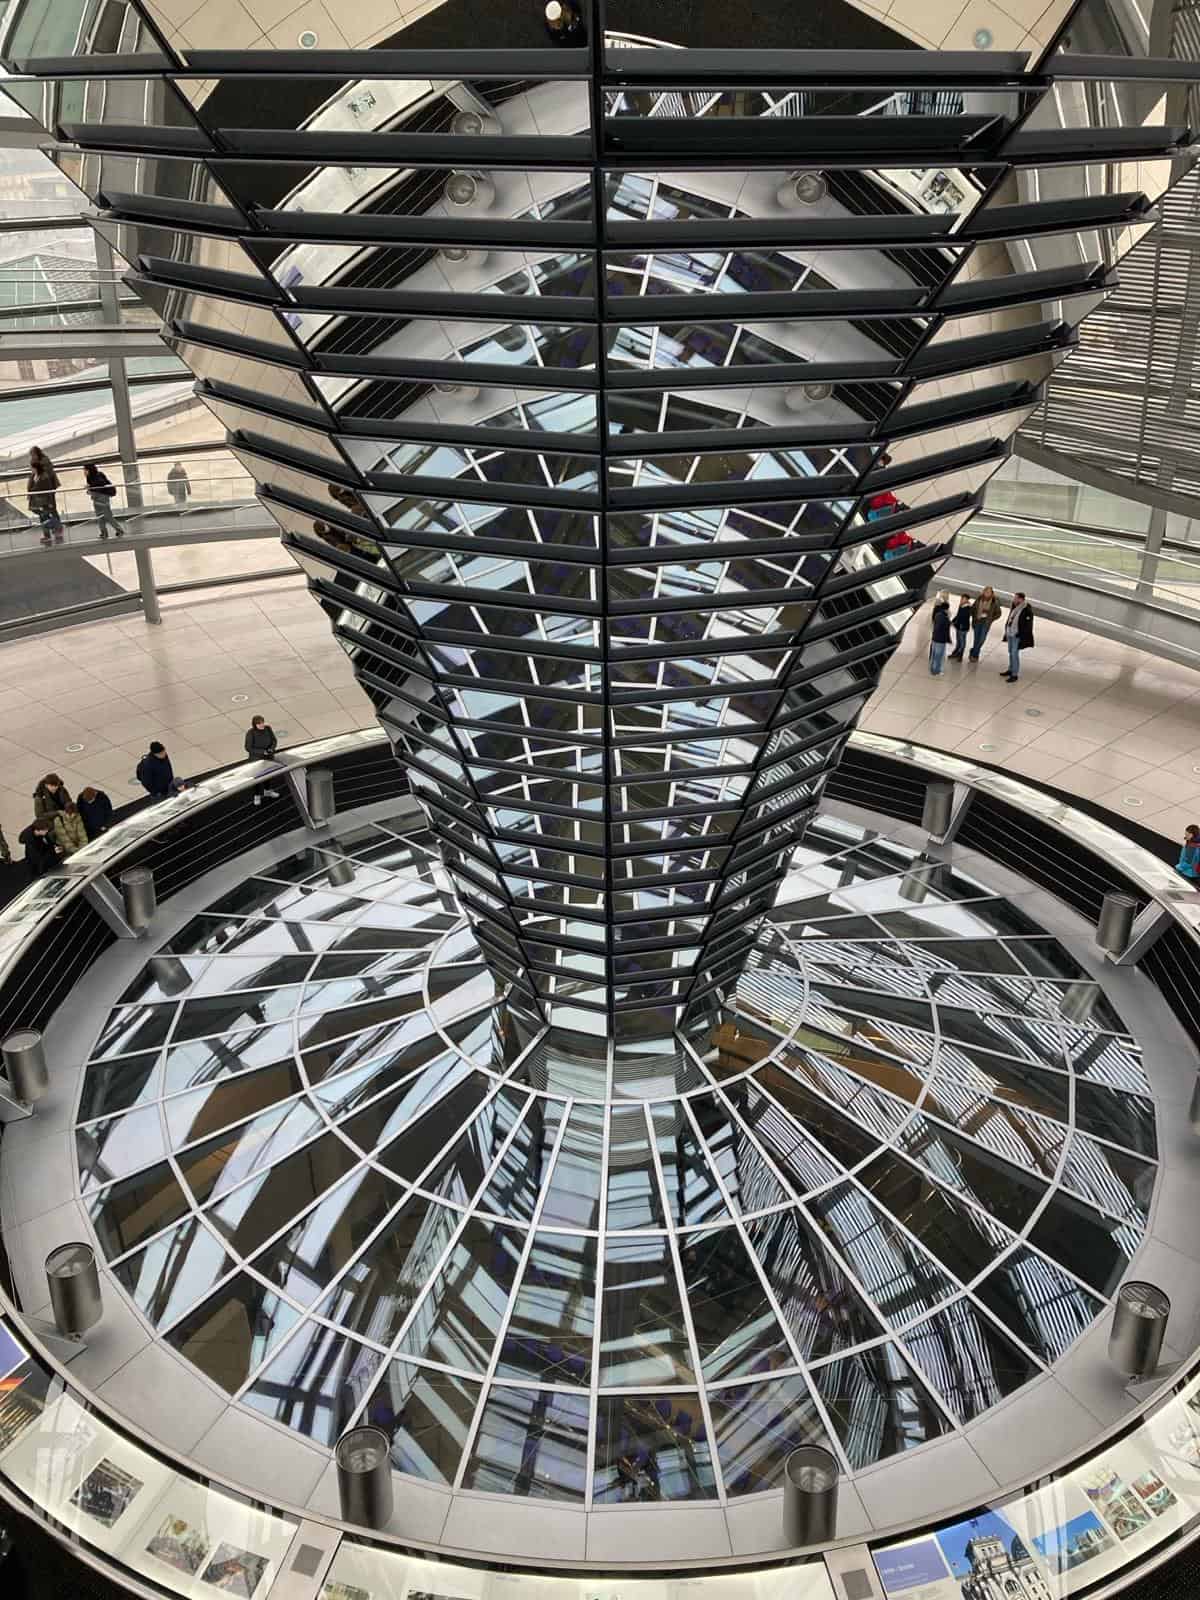 Students from Didsbury High School visit the Reichstag